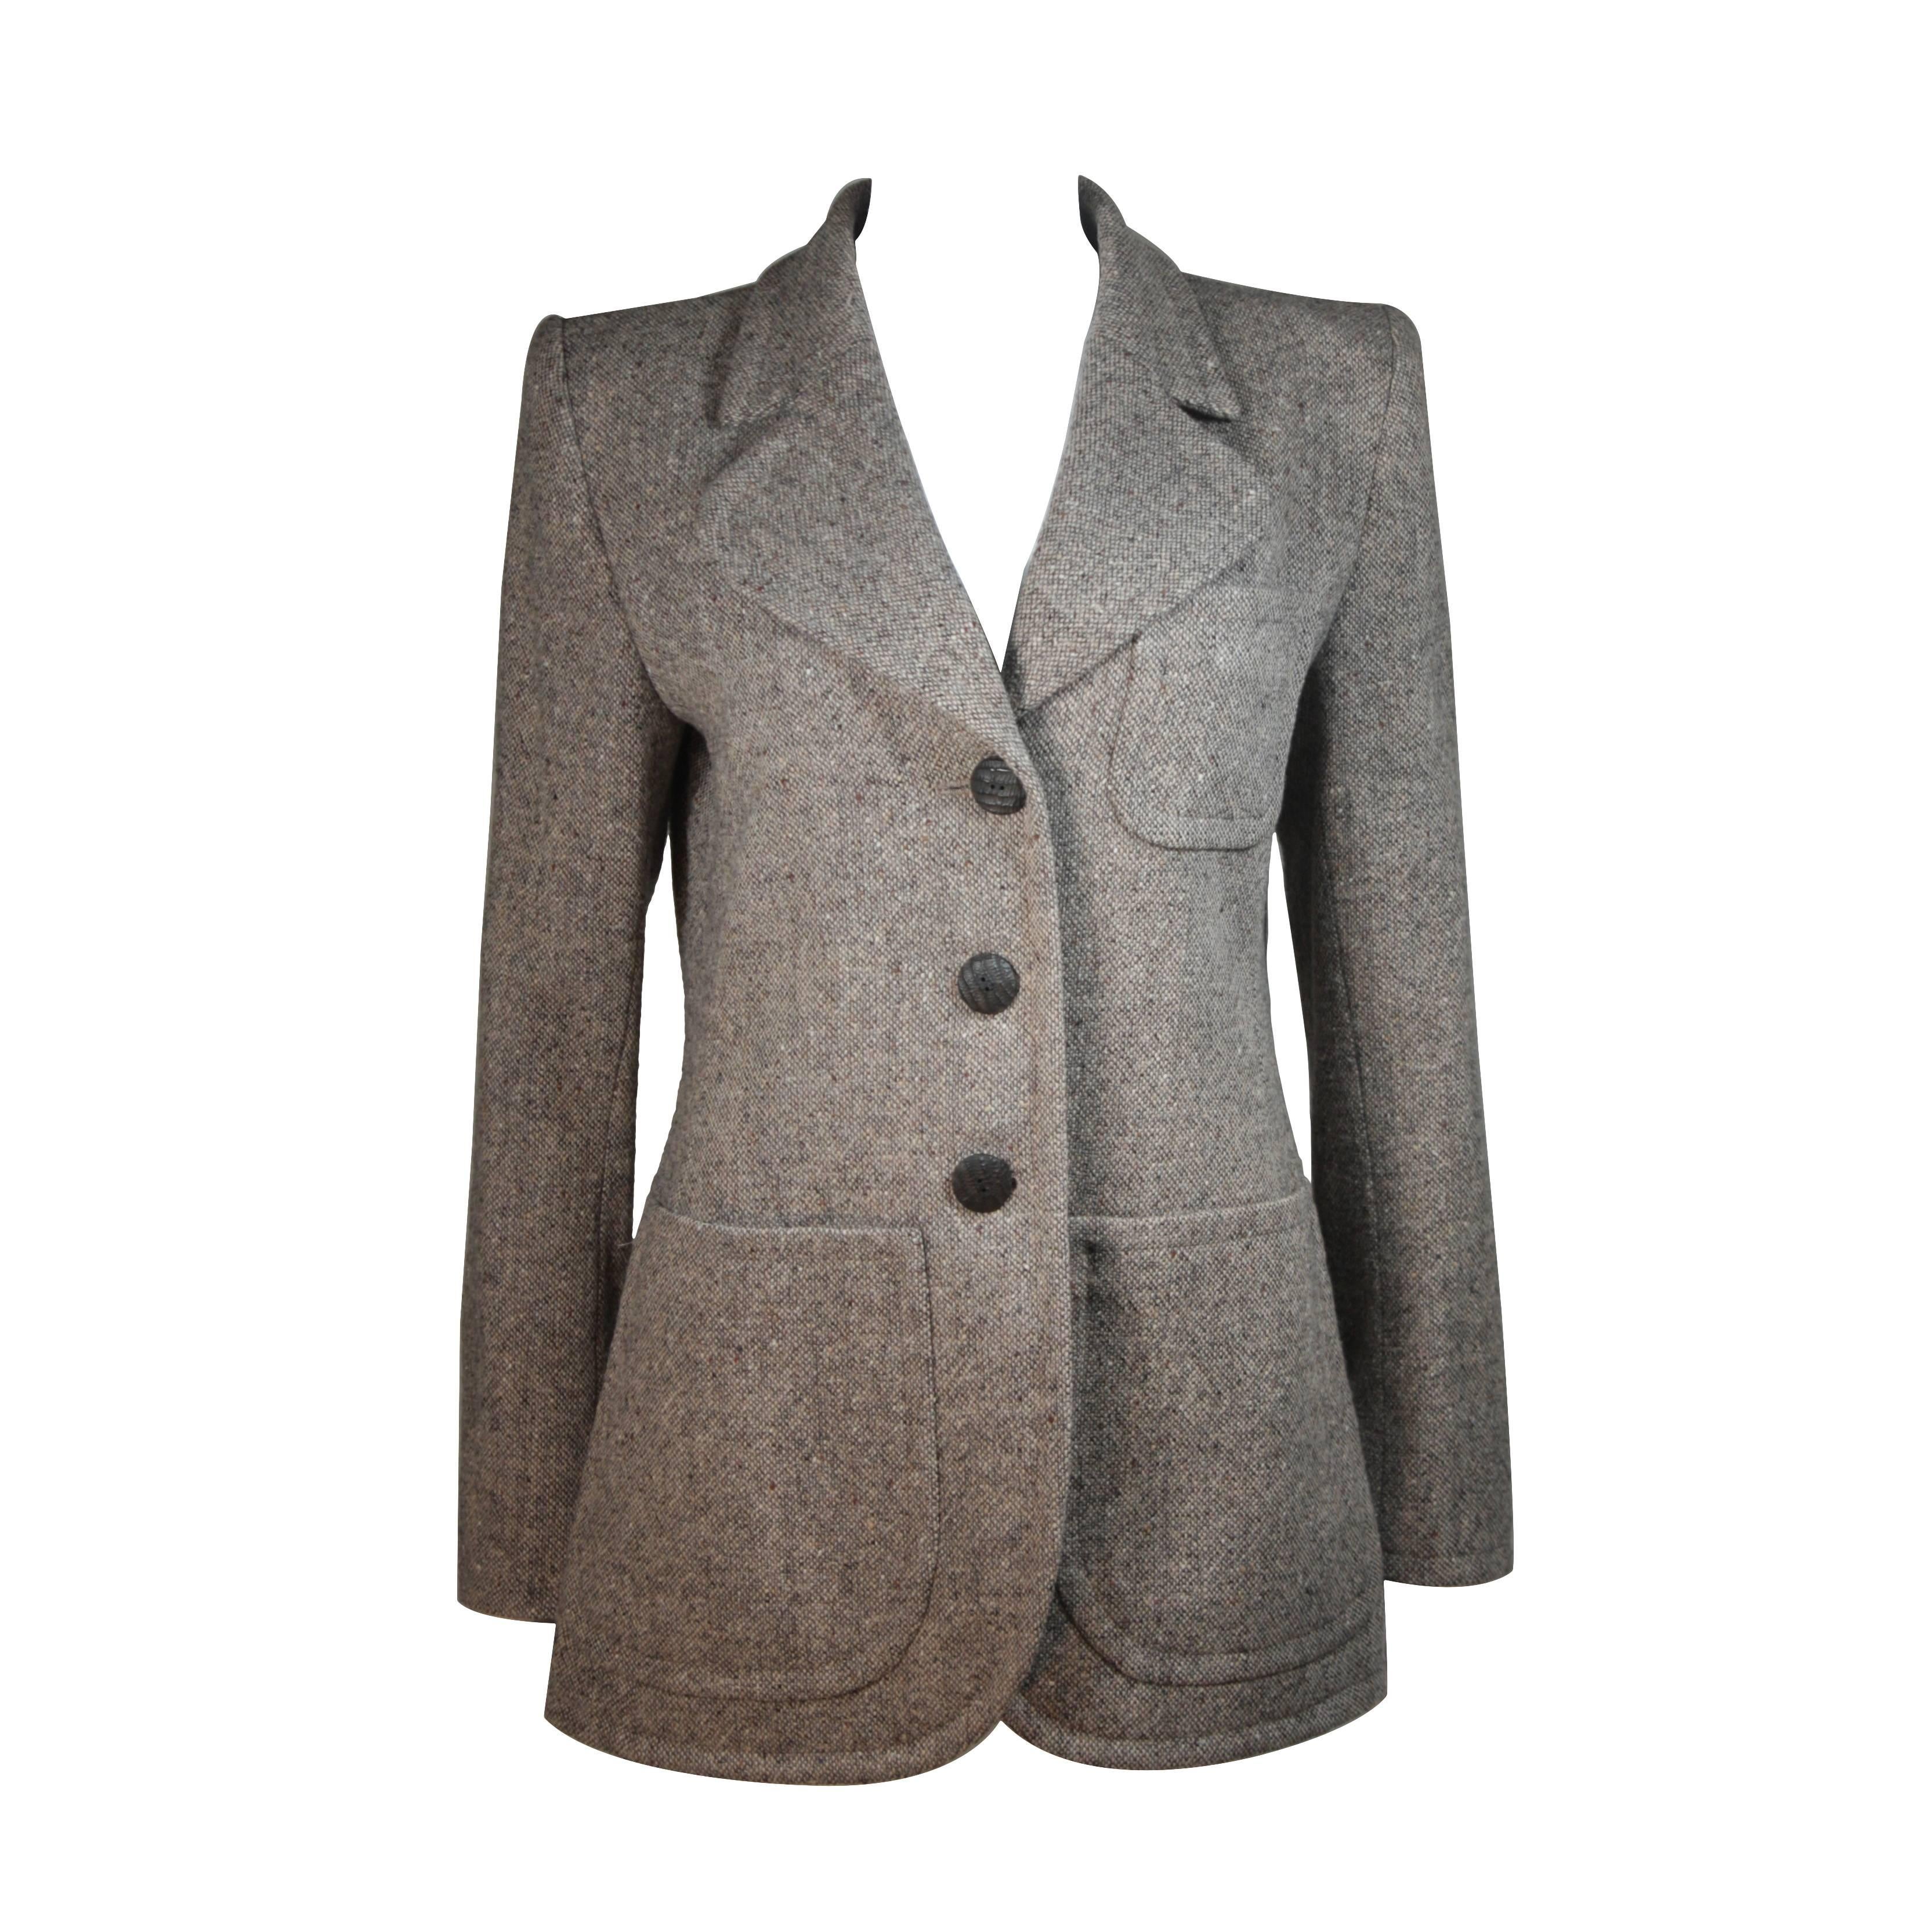 YVES SAINT LAURENT Wool Jacket with Wood Buttons Size 40